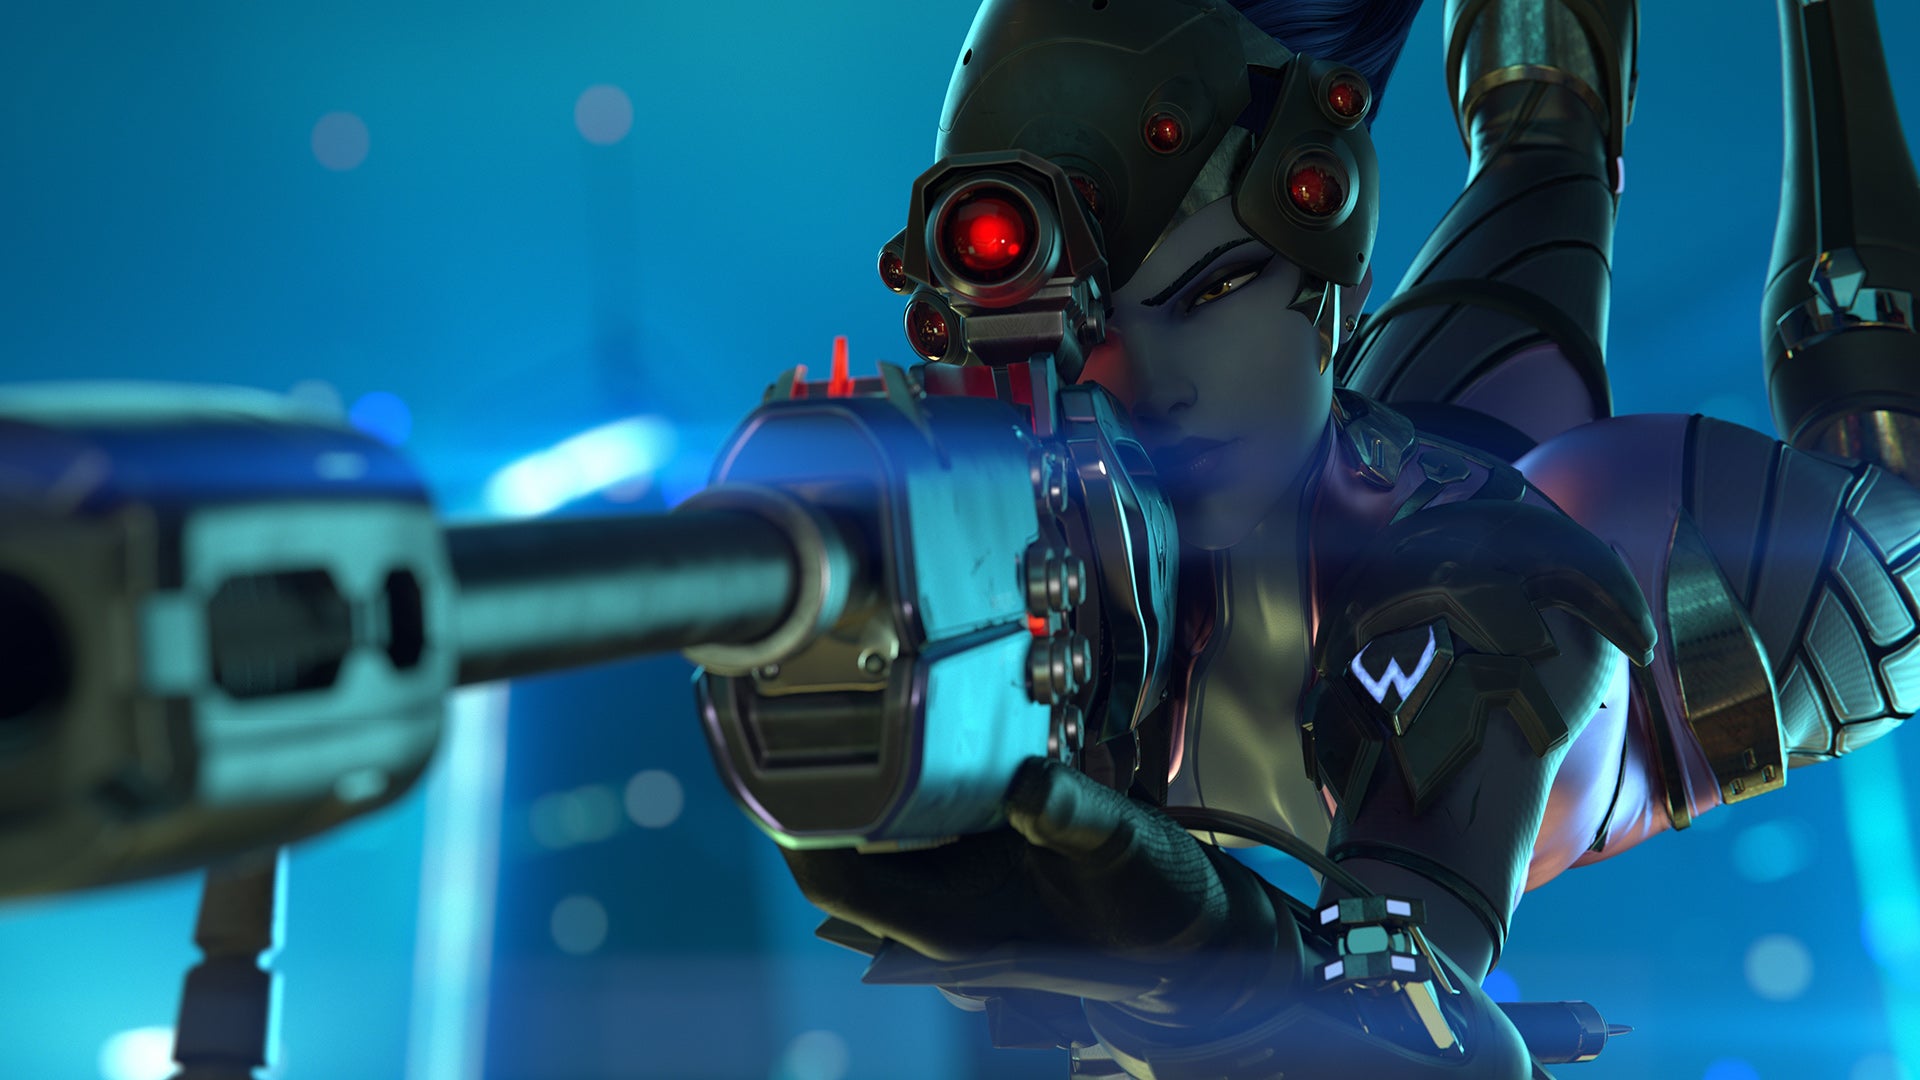 Heroes like Widowmaker are going to target your support. If you can't kill them immediately, find ways to make them ineffective. (Image: Blizzard Entertainment)